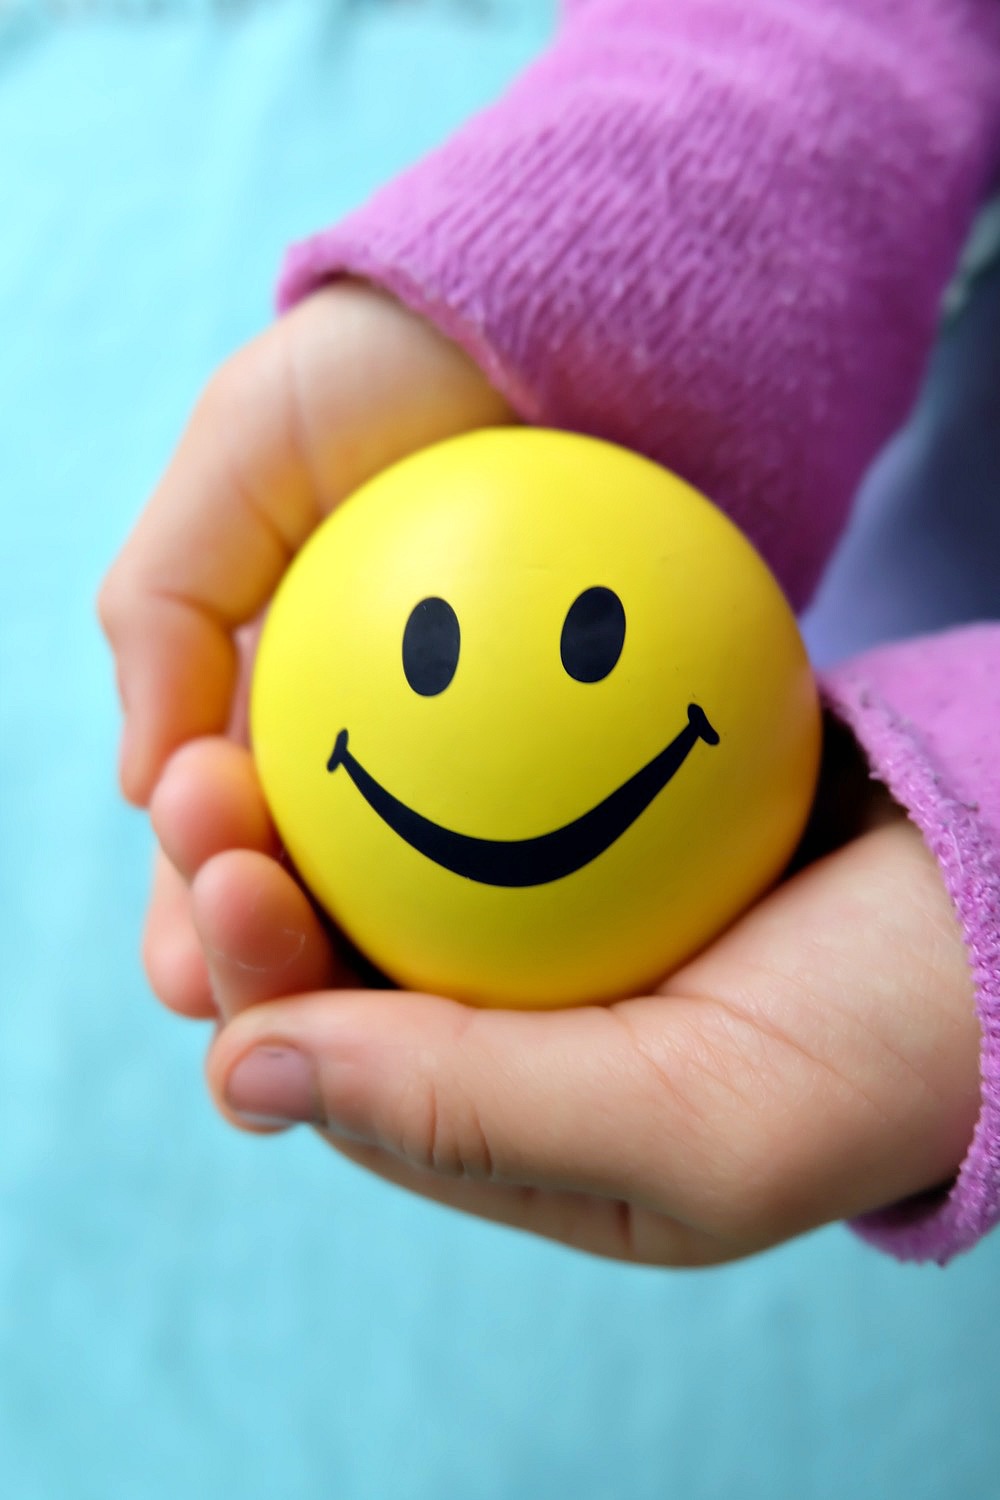 These easy DIY Emoji Squishy Stress Balls Filled With Slime take all of your kids favorite things and puts it into one fun kids craft! Emojis? Check! Squishies? Check! Slime? Check! Perfect for non-candy Easter Basket Stuffer ideas, Valentine's Day, Birthday Party Favors and more! Make using your Cricut or with balloons pre-printed with emojis or happy faces. #Crafts #PartyFavors #emojis #slime #Cricut